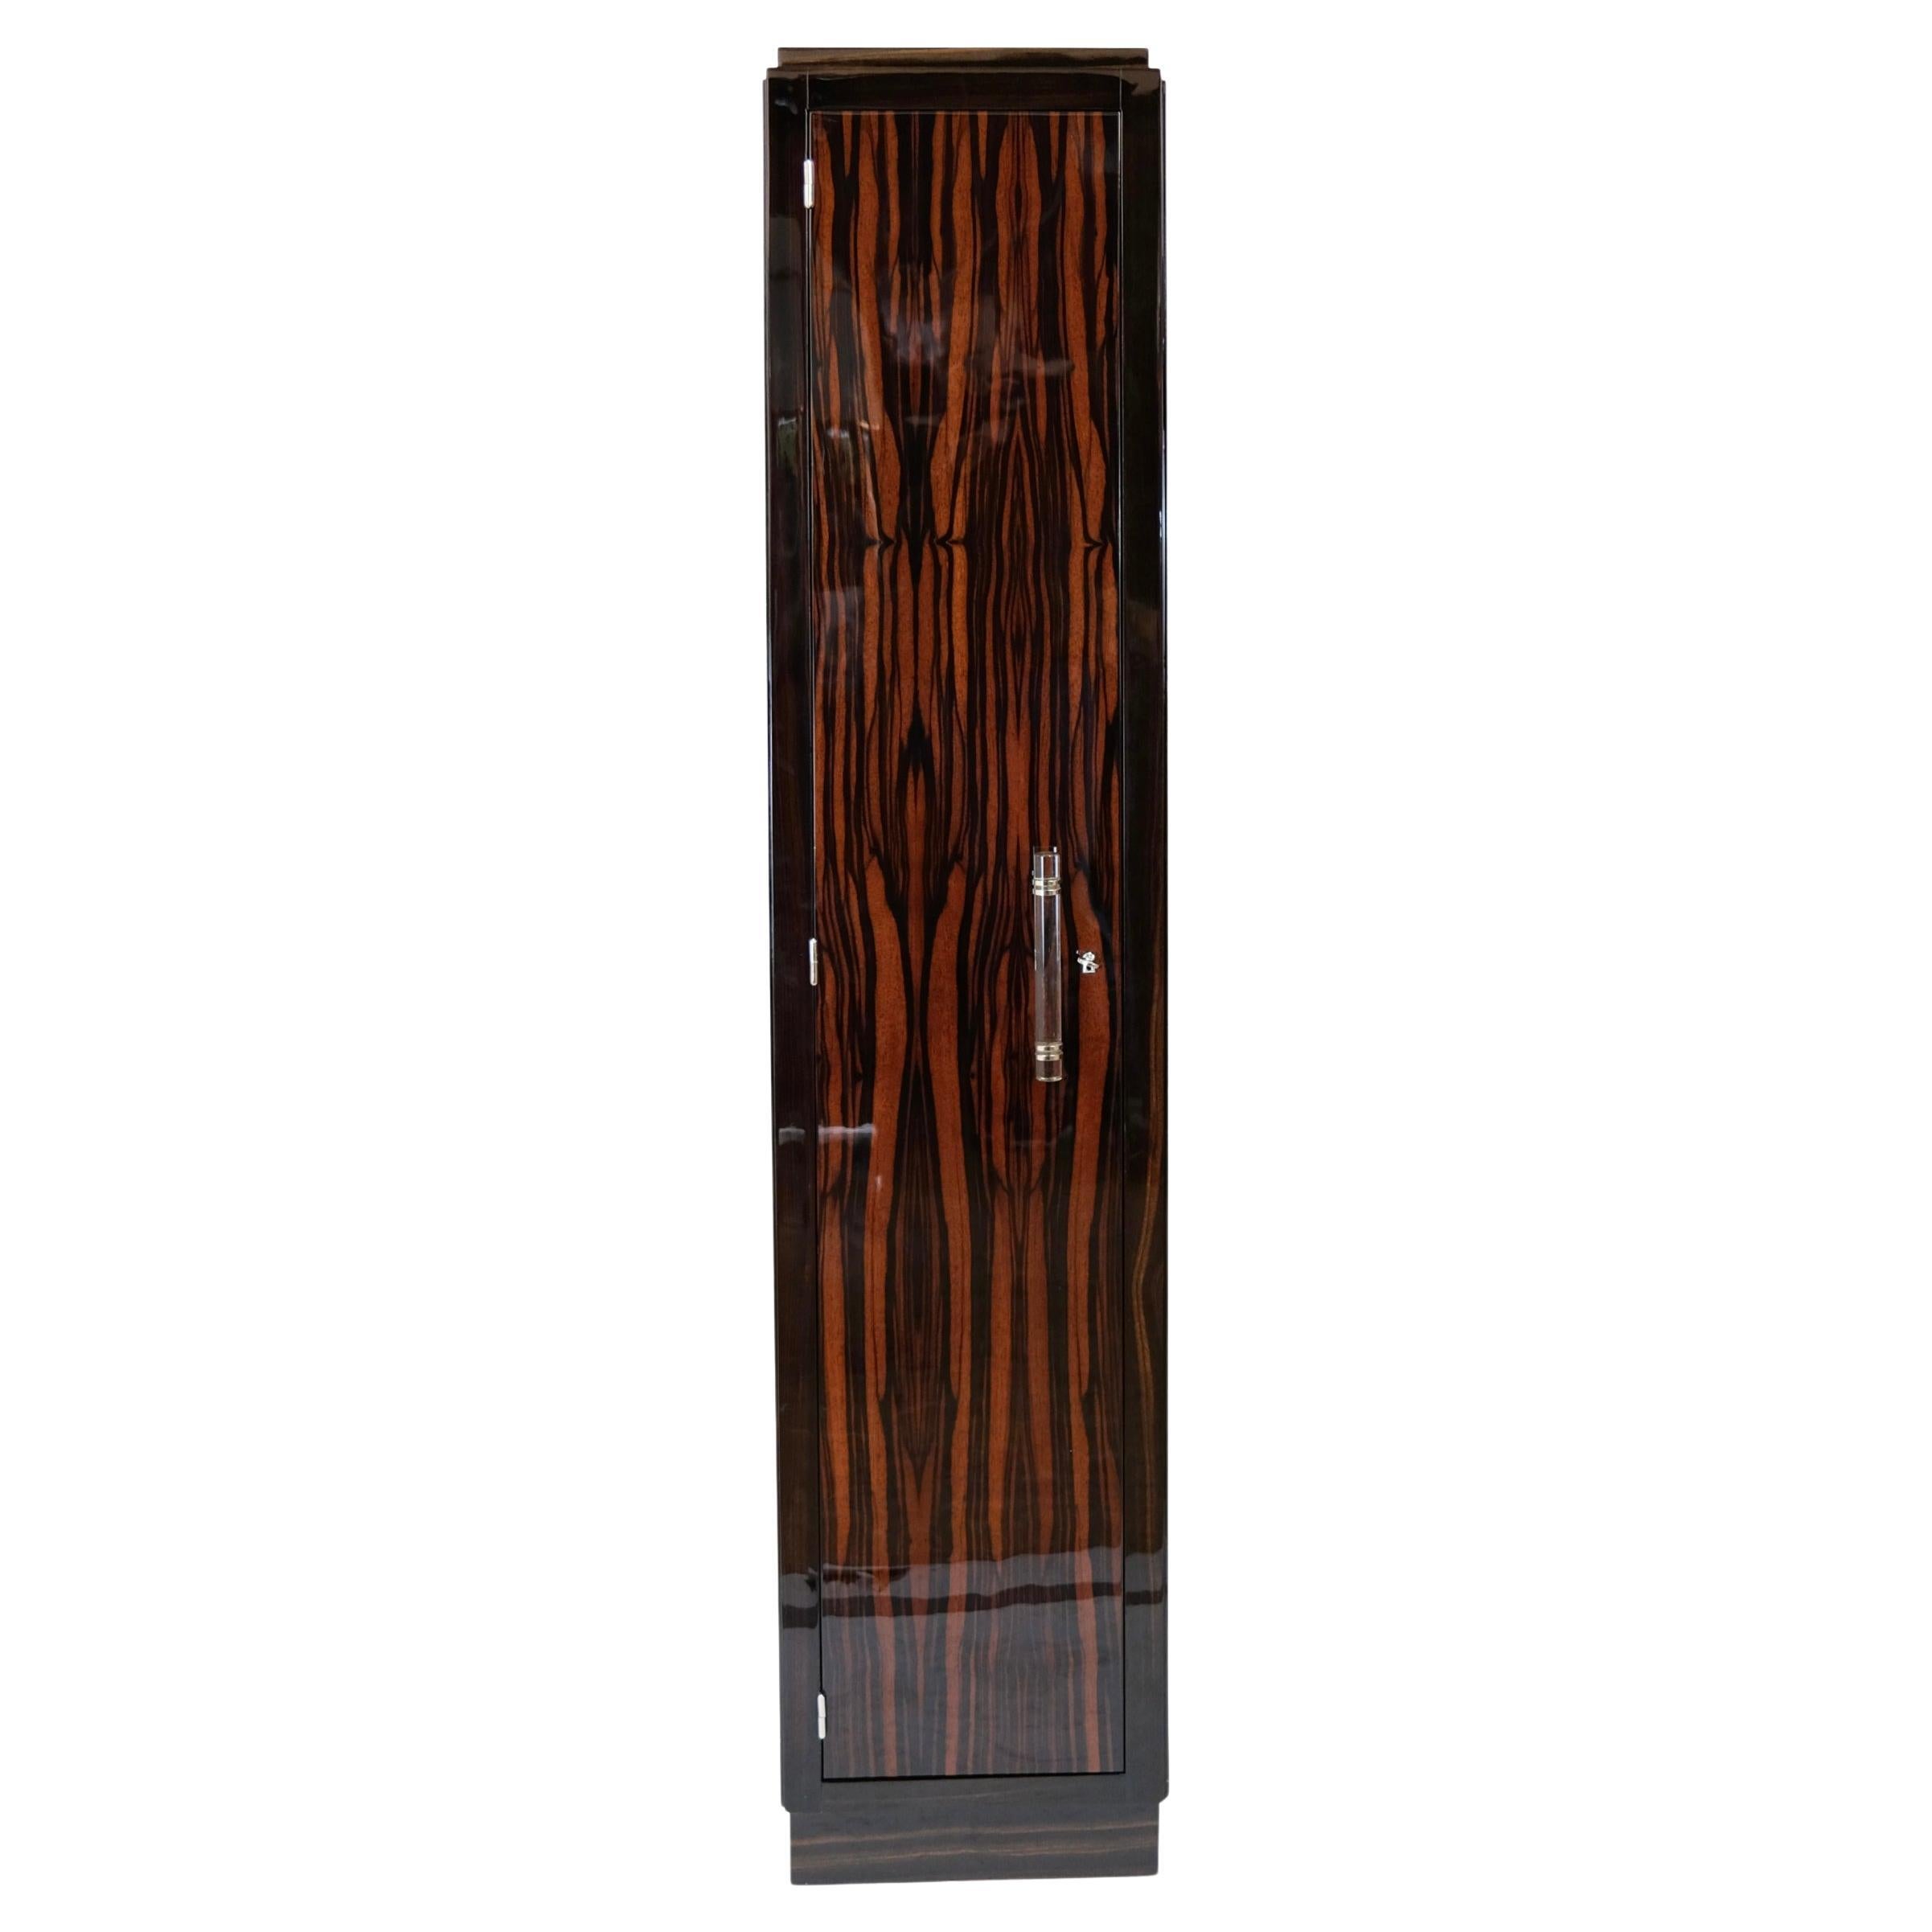 Narrow French Art Deco Cabinet with Macassar Veneer in High Gloss Lacquer